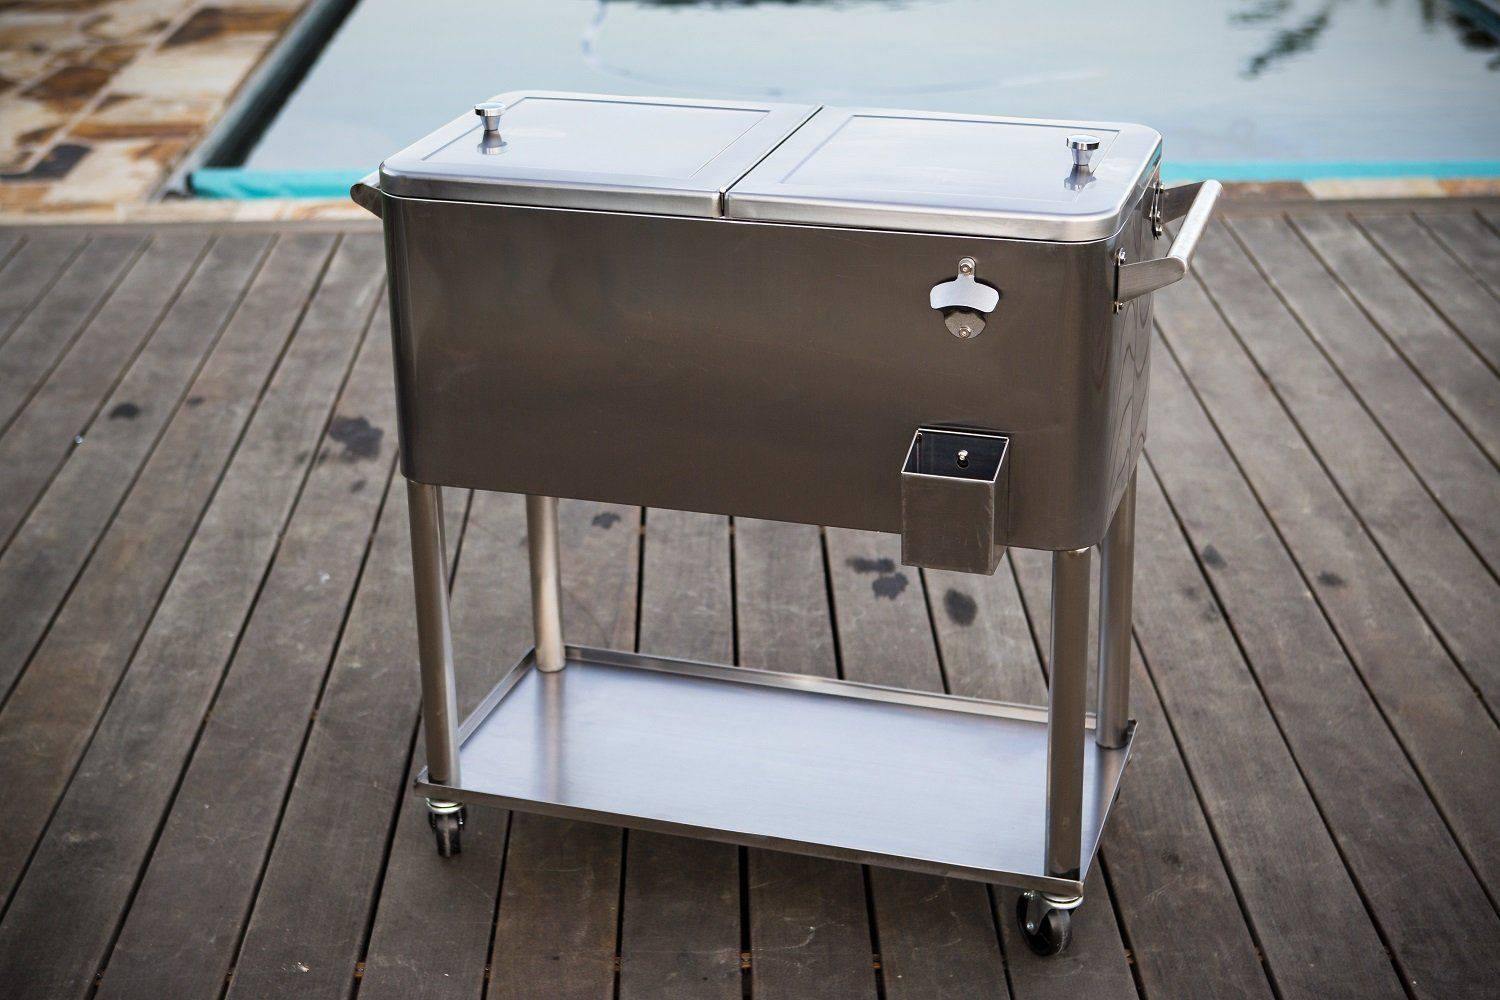 Patio Cooler Stainless Steel - 80QT - DTI Direct Canada